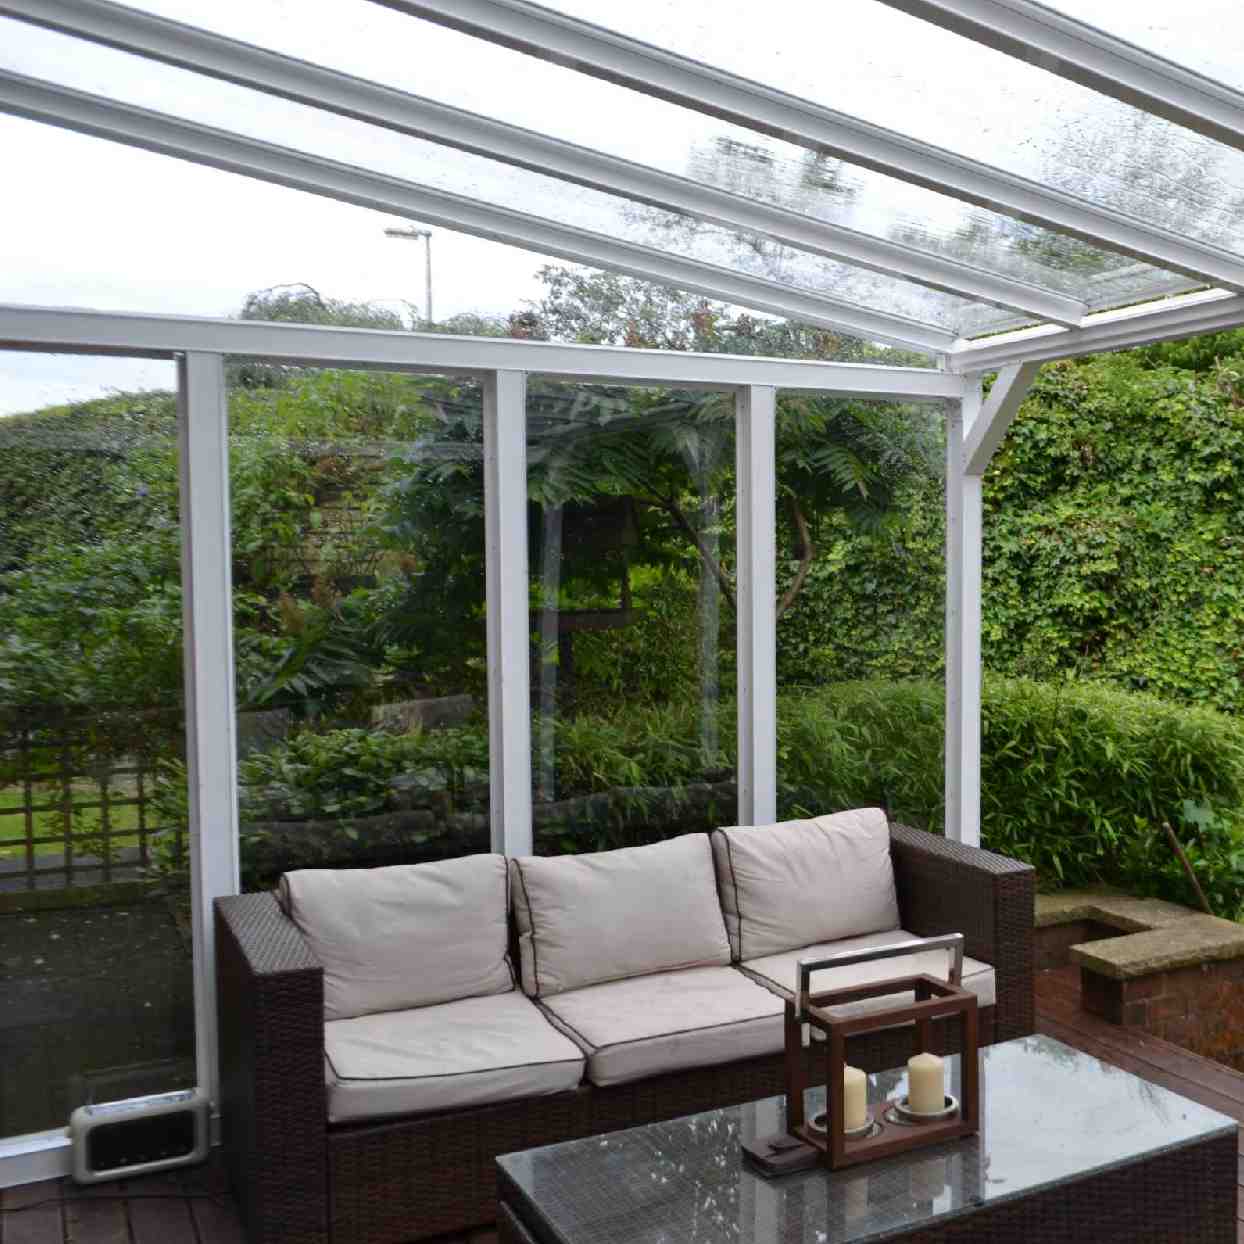 Buy Omega Verandah White with 16mm Polycarbonate Glazing - 11.4m (W) x 4.0m (P), (5) Supporting Posts online today